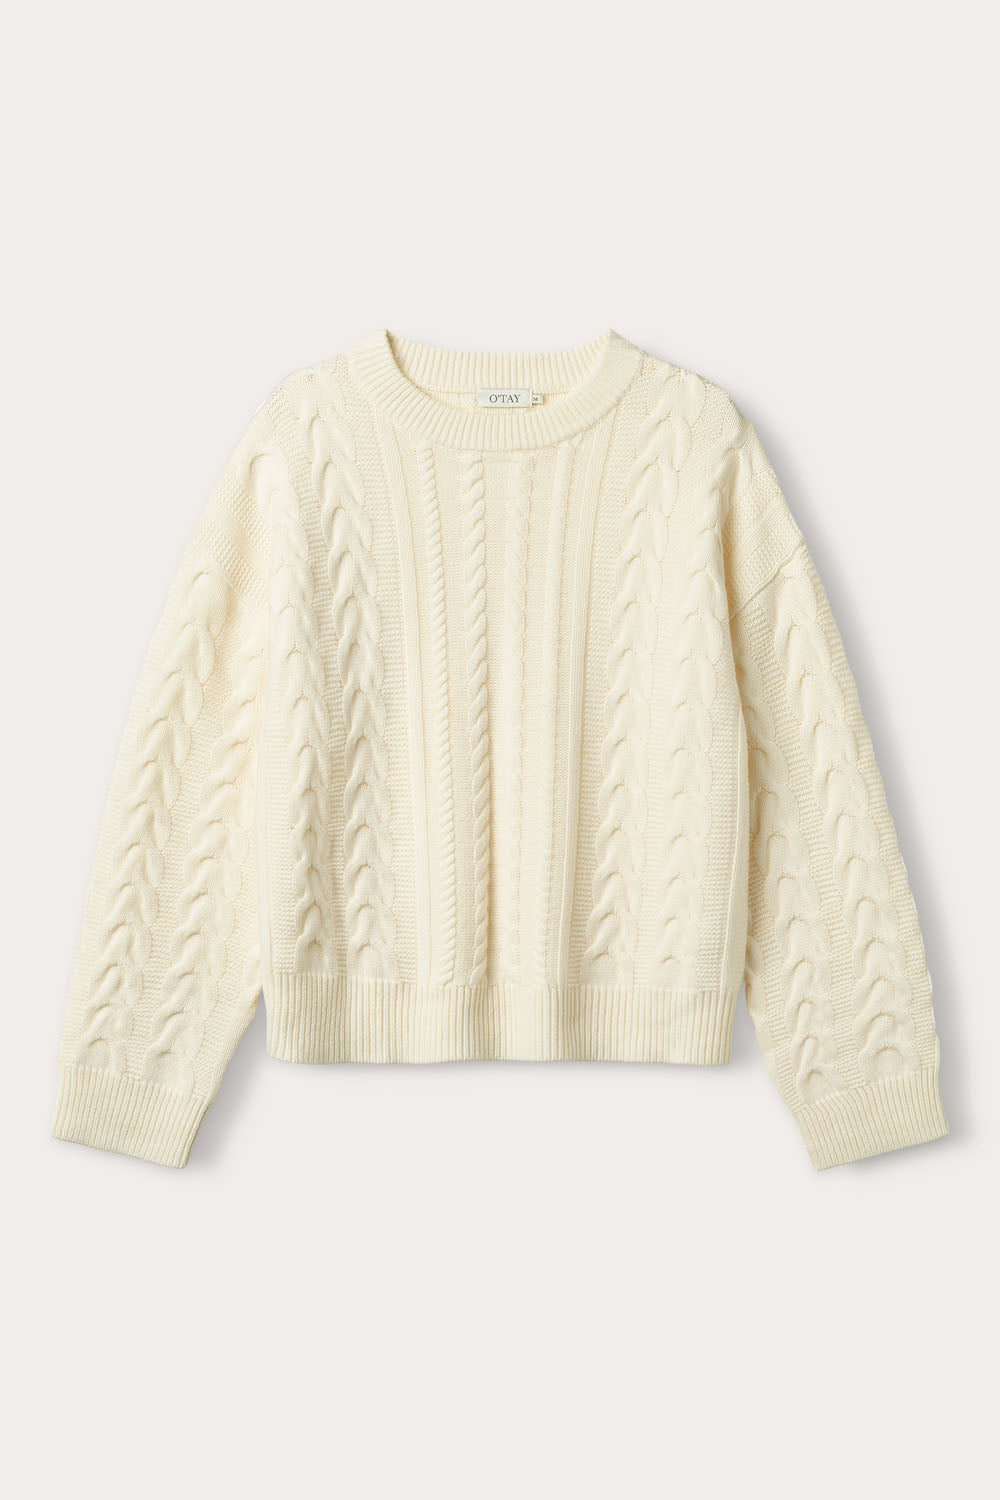 O'TAY Gemma Sweater Blouses Off White